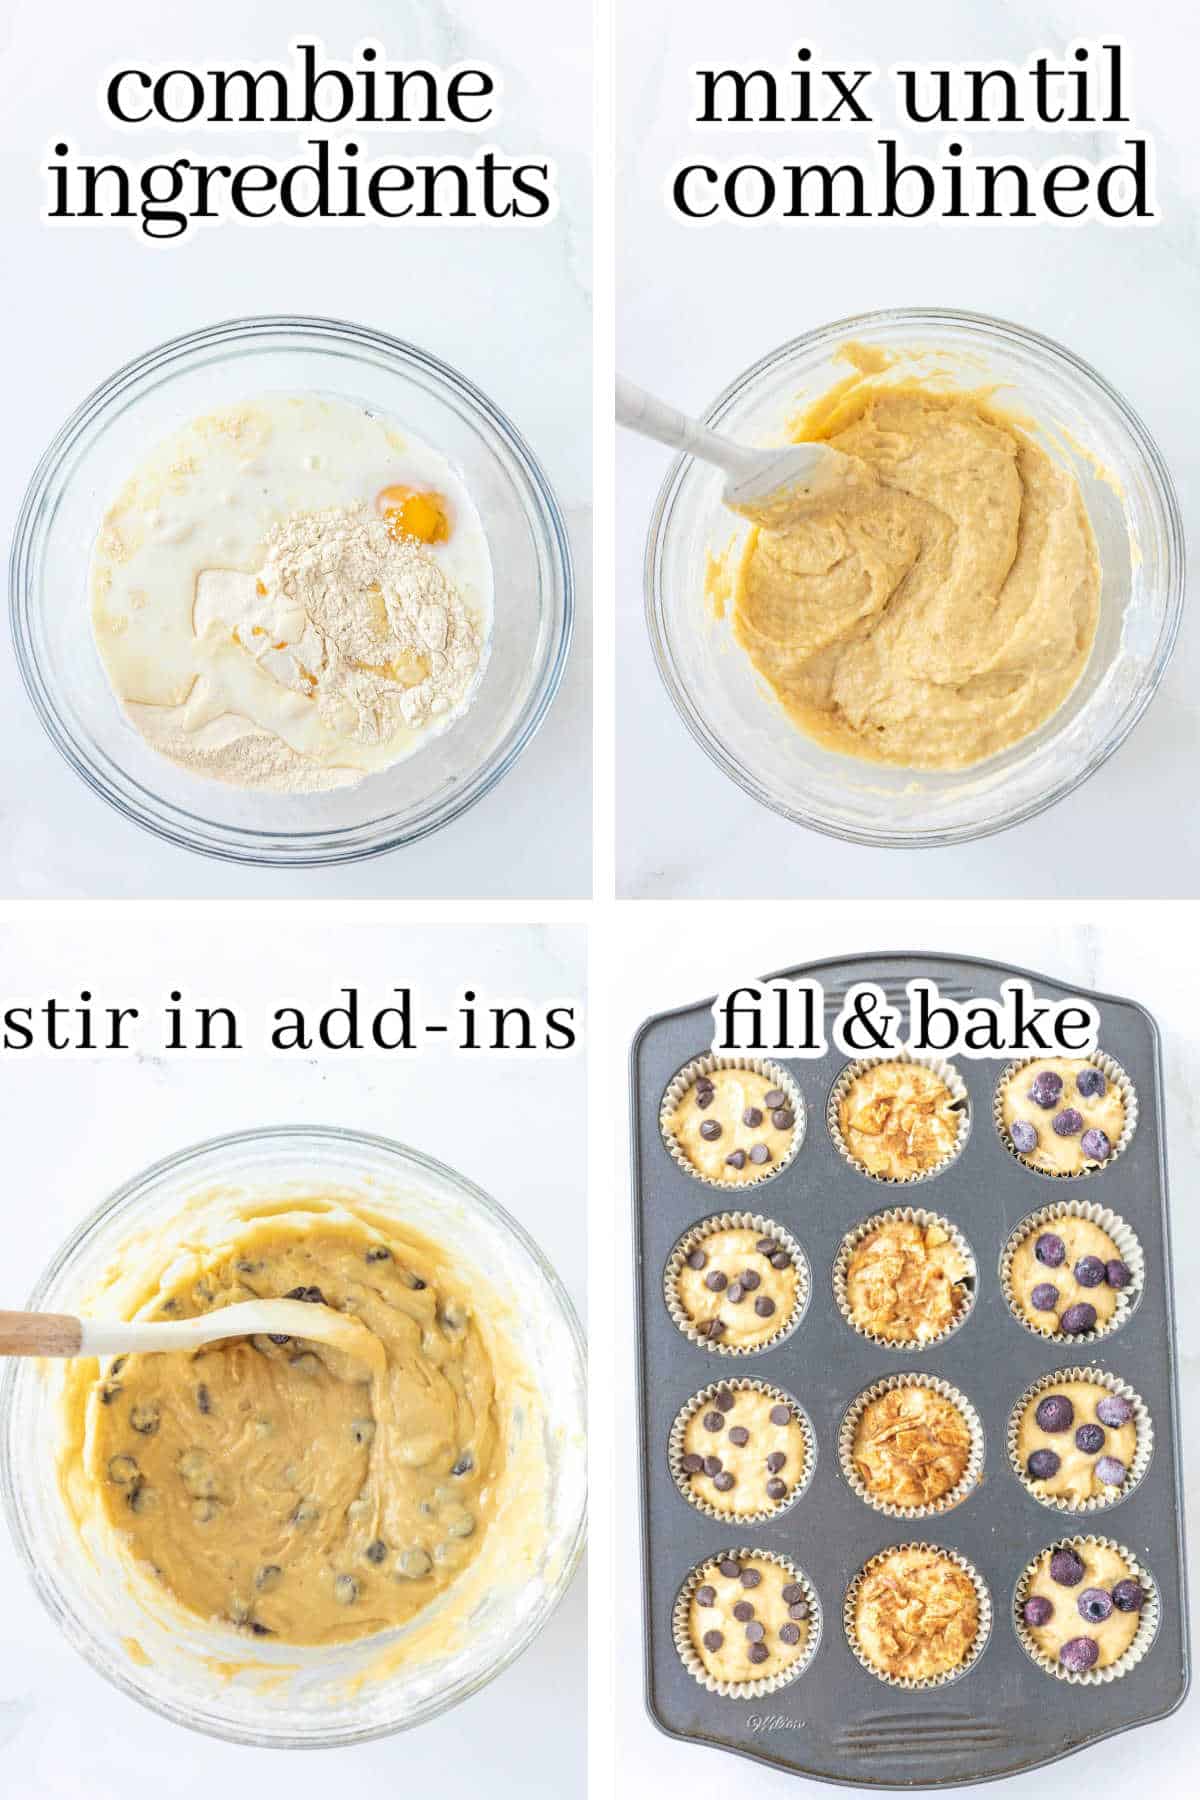 Step-by-step instructions to make the recipe. With print overlay for clarification.